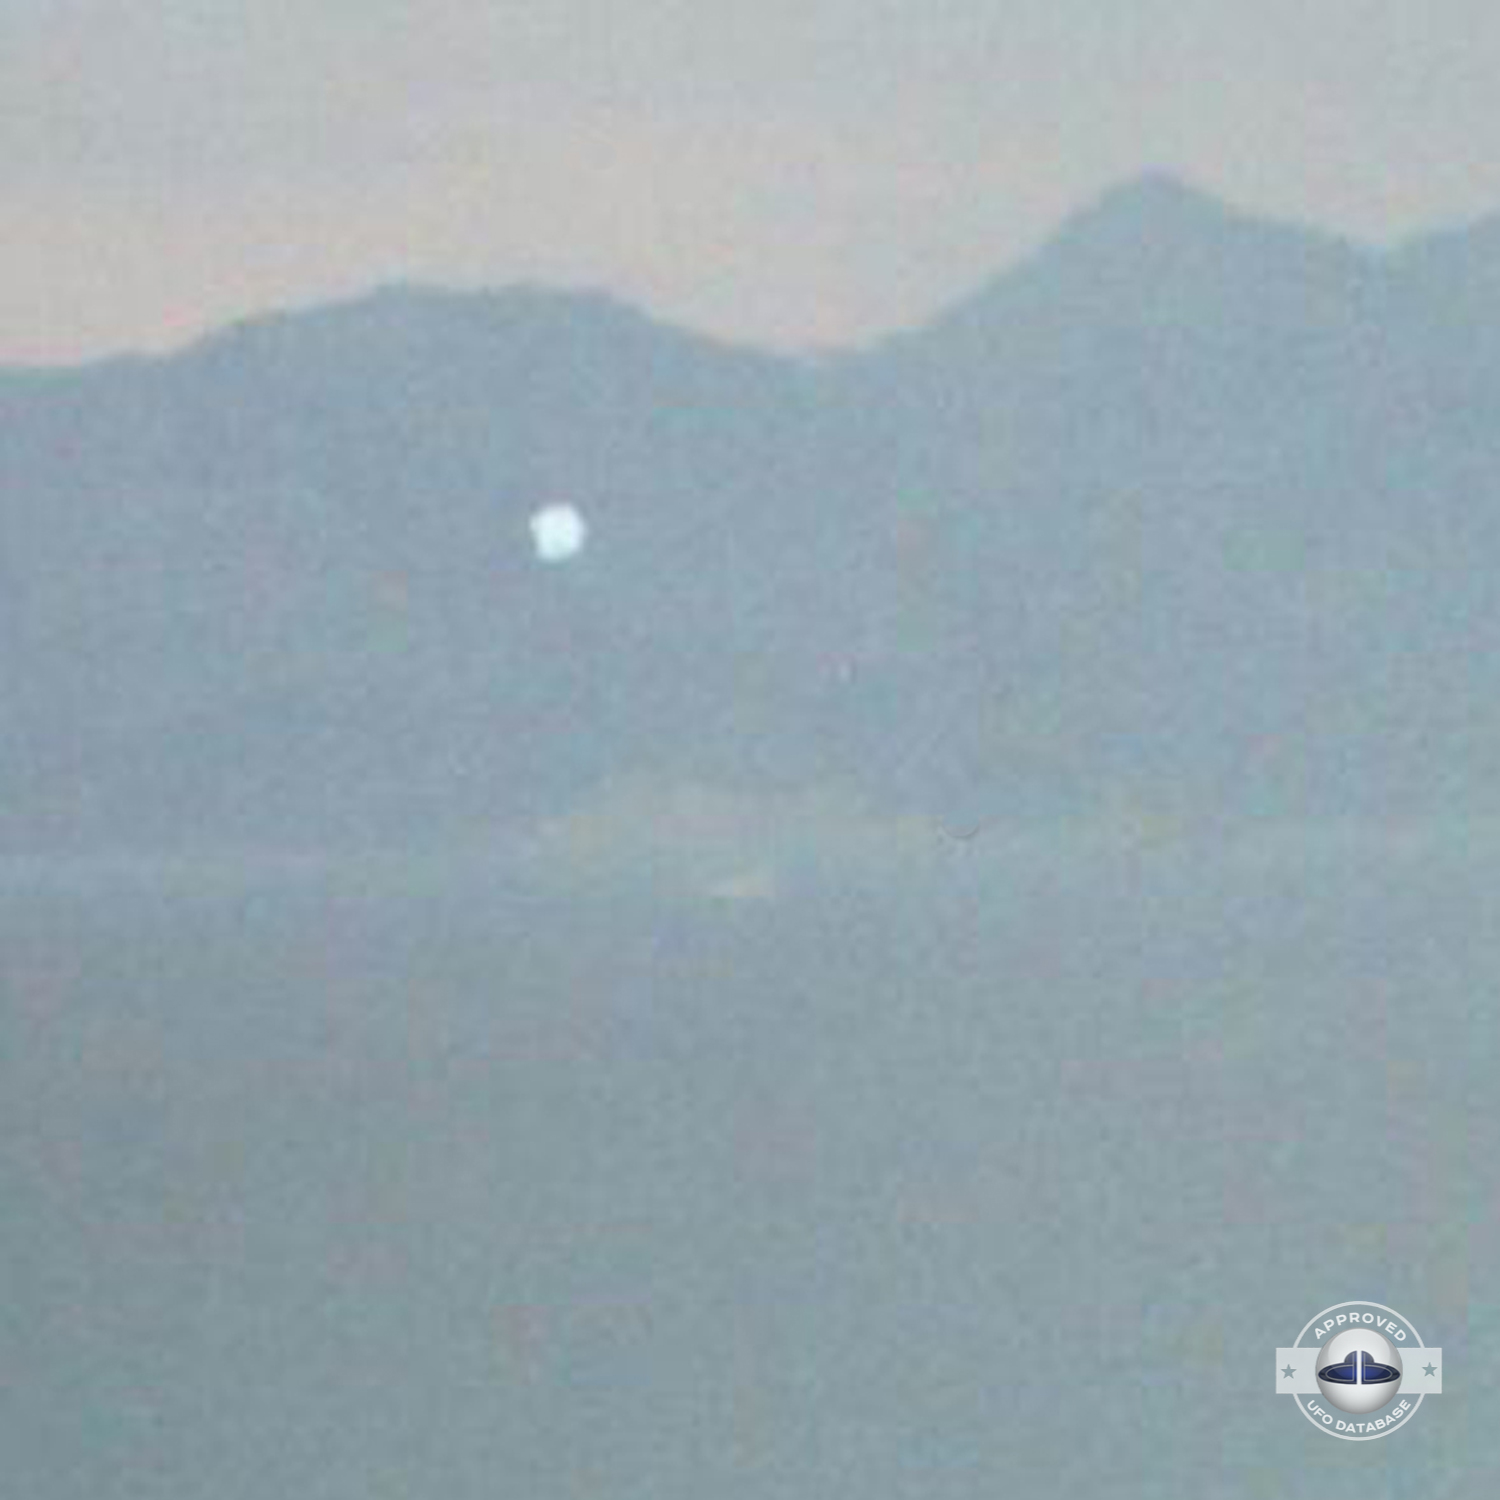 UFO passing over unknown body of water somewhere in Turkey | May 2003 UFO Picture #173-3